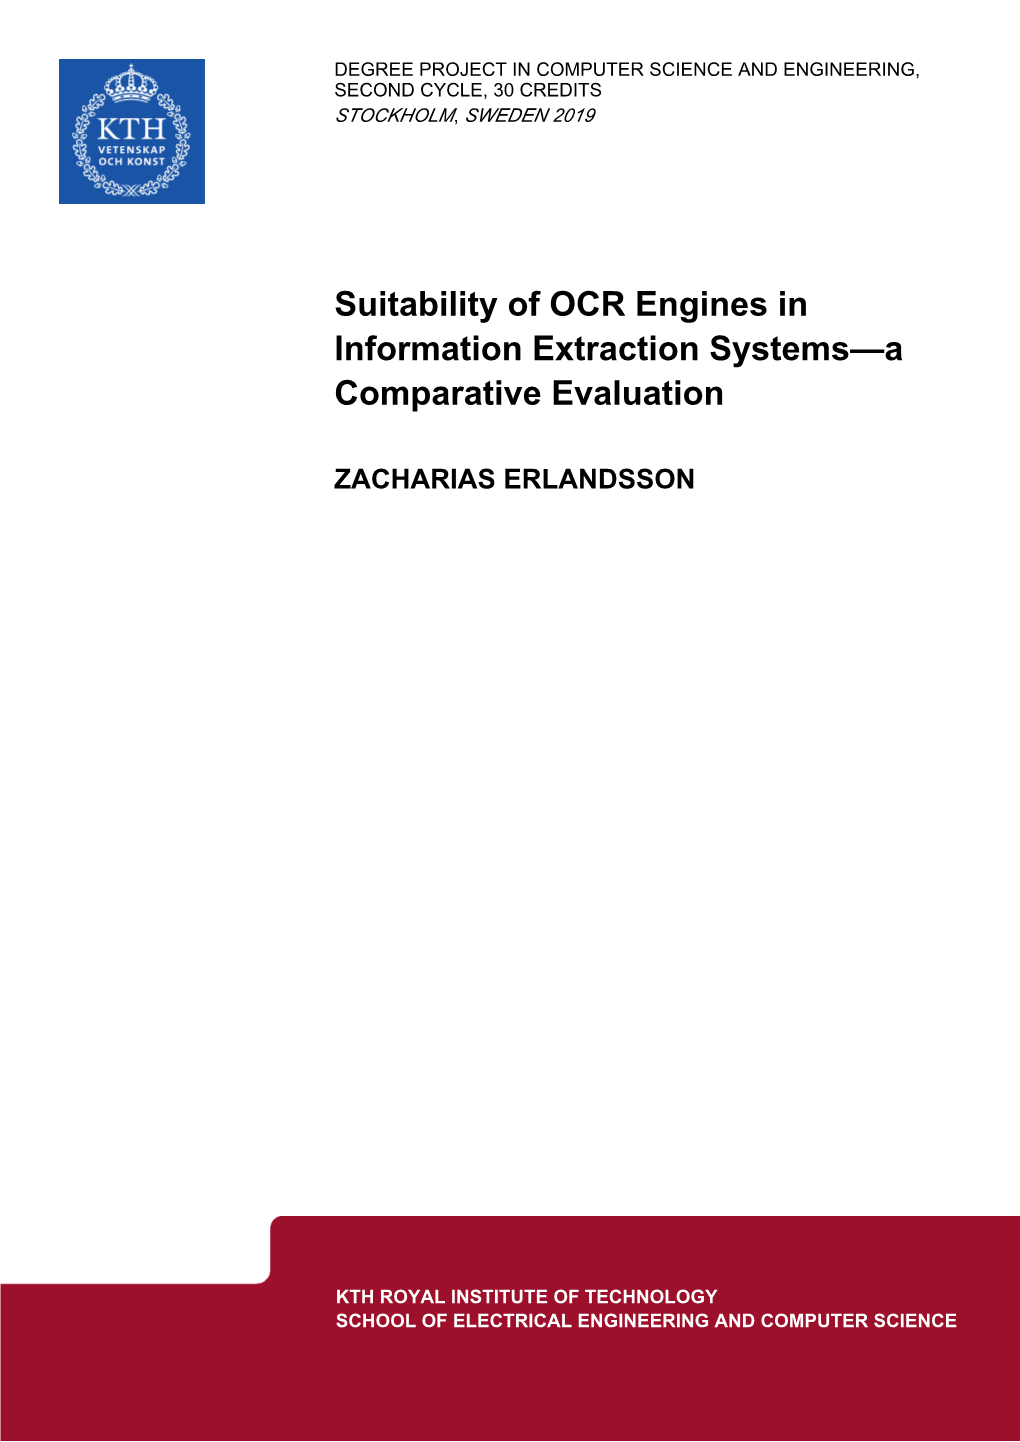 Suitability of OCR Engines in Information Extraction Systems—A Comparative Evaluation